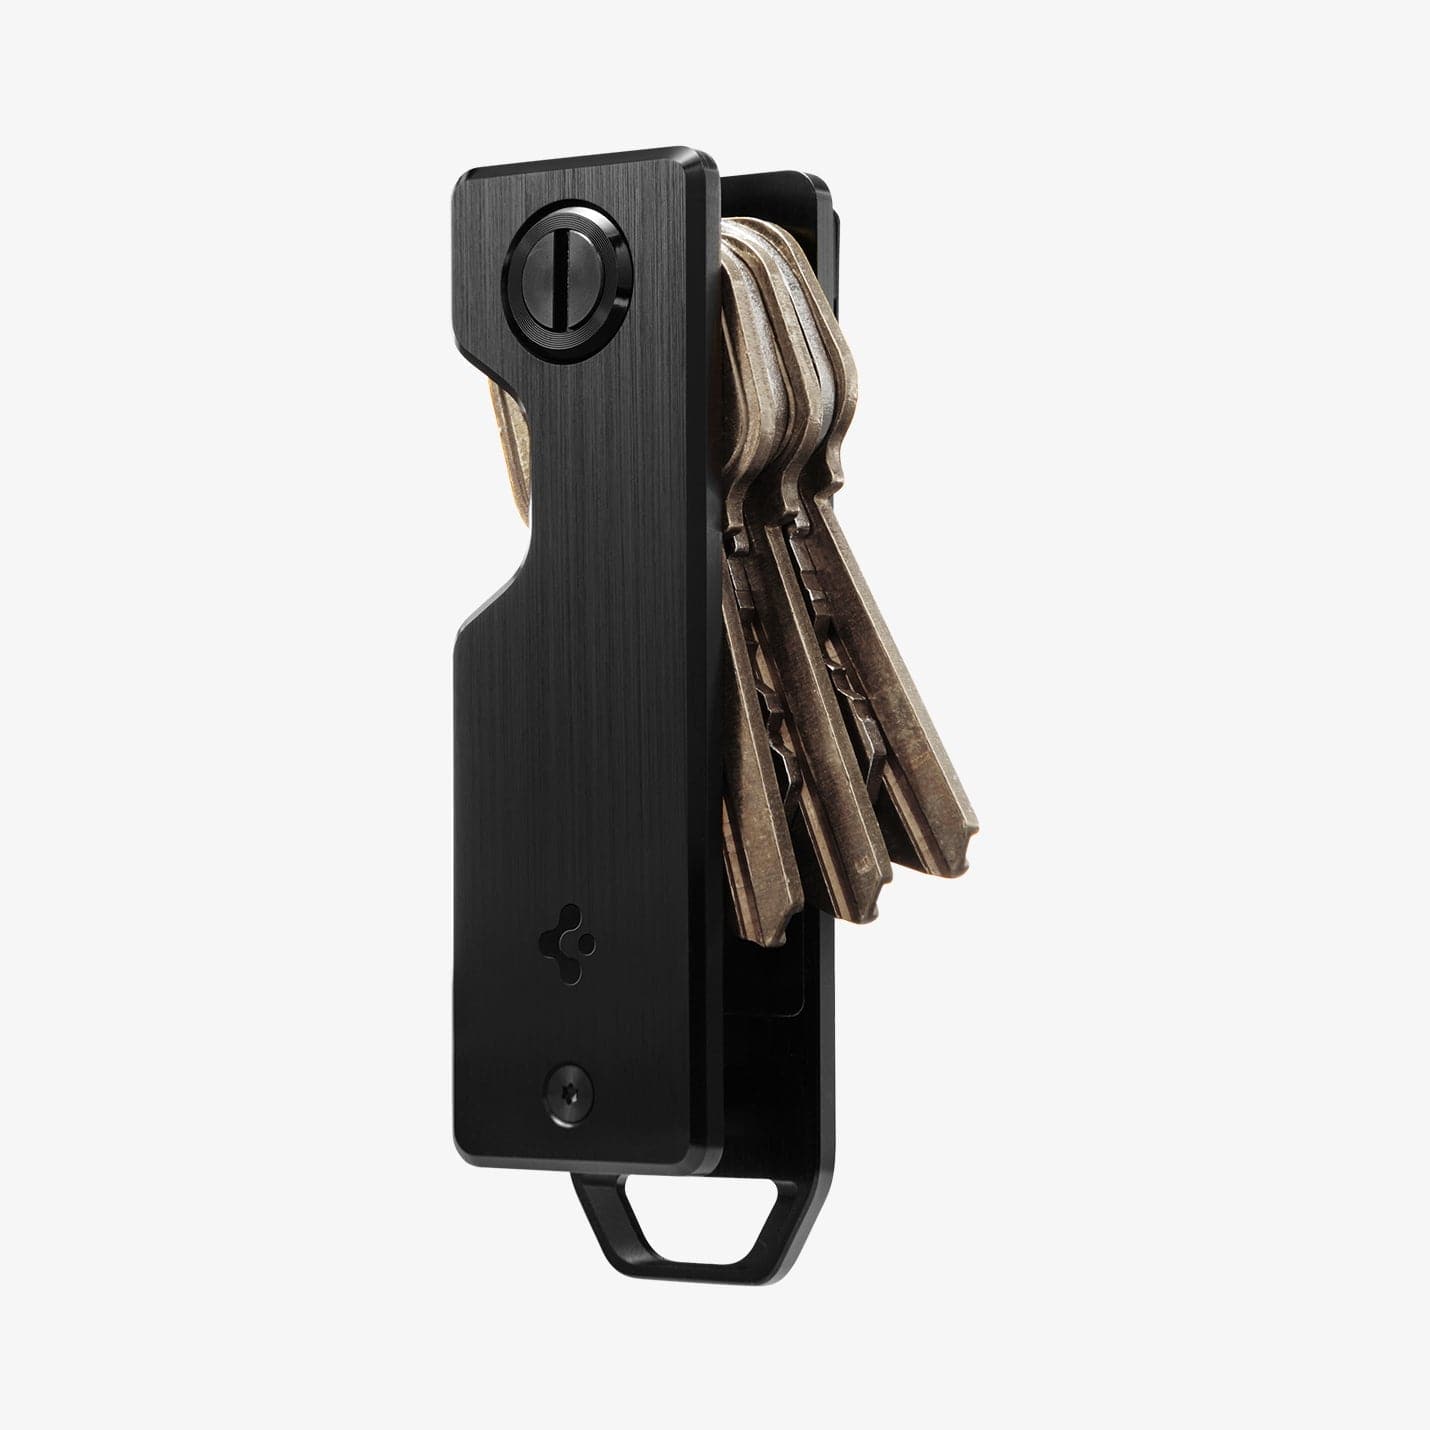 AHP05320 - Key Holder Organizer Metal Fit in black showing the organizer with keys inserted